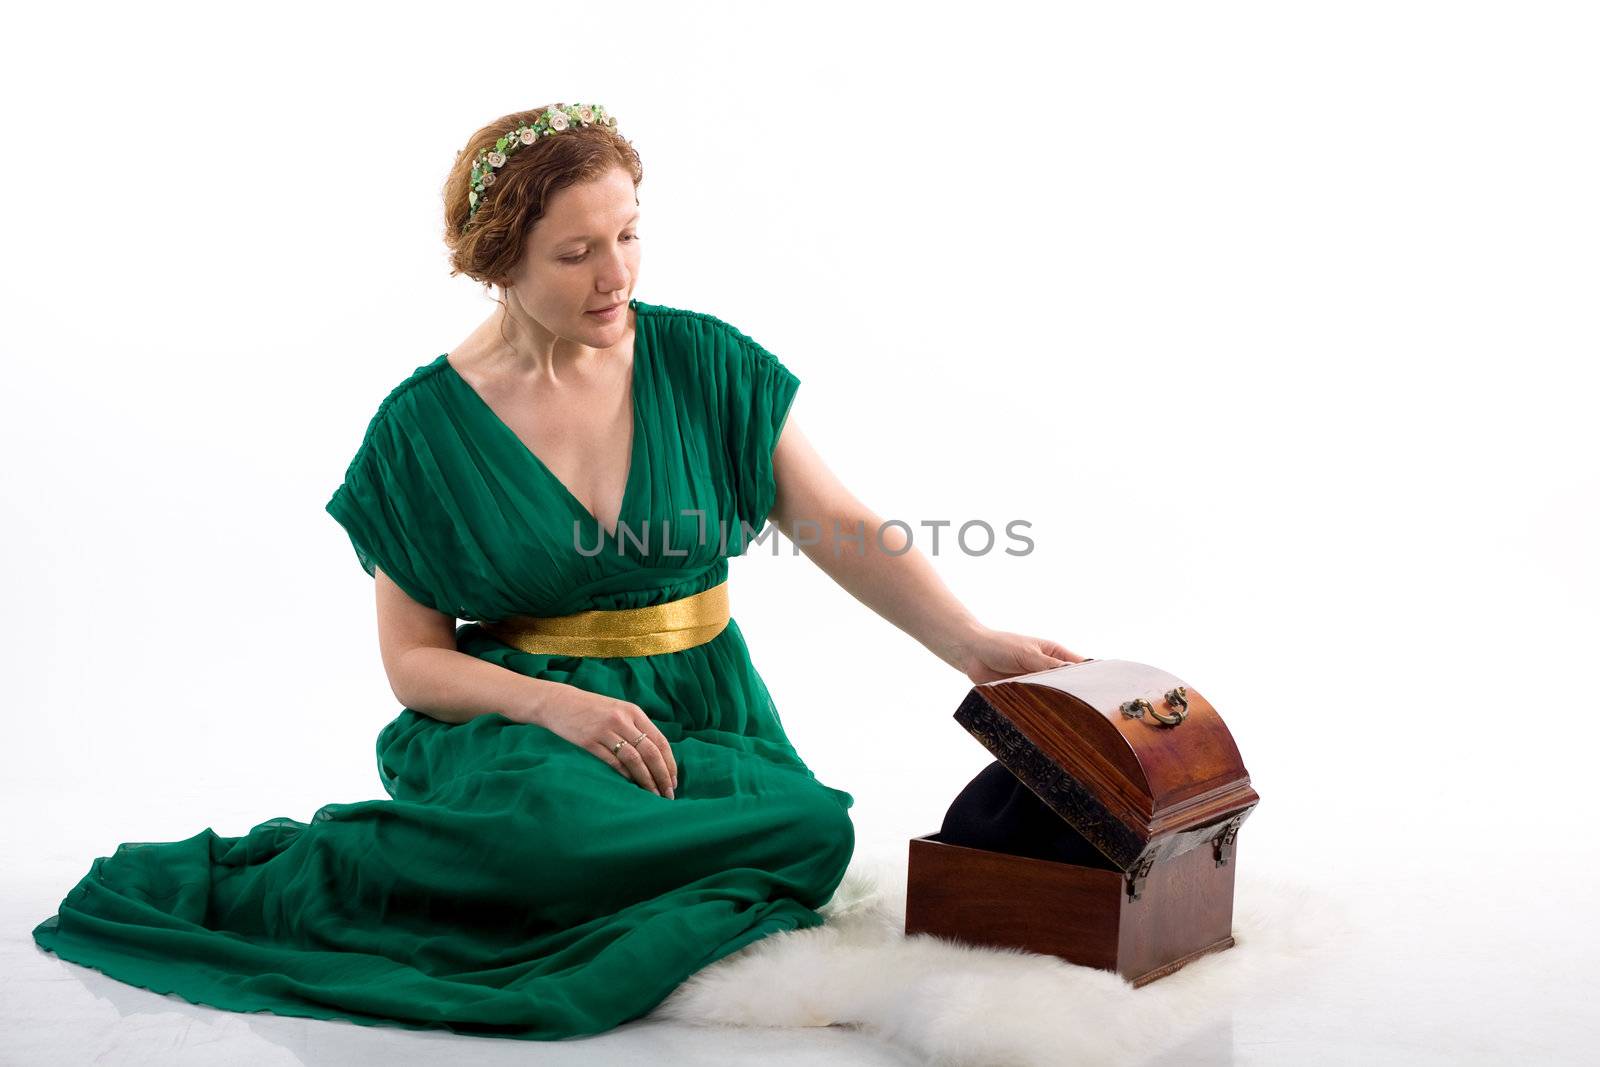 Lady in green antique dress opening box on white background
